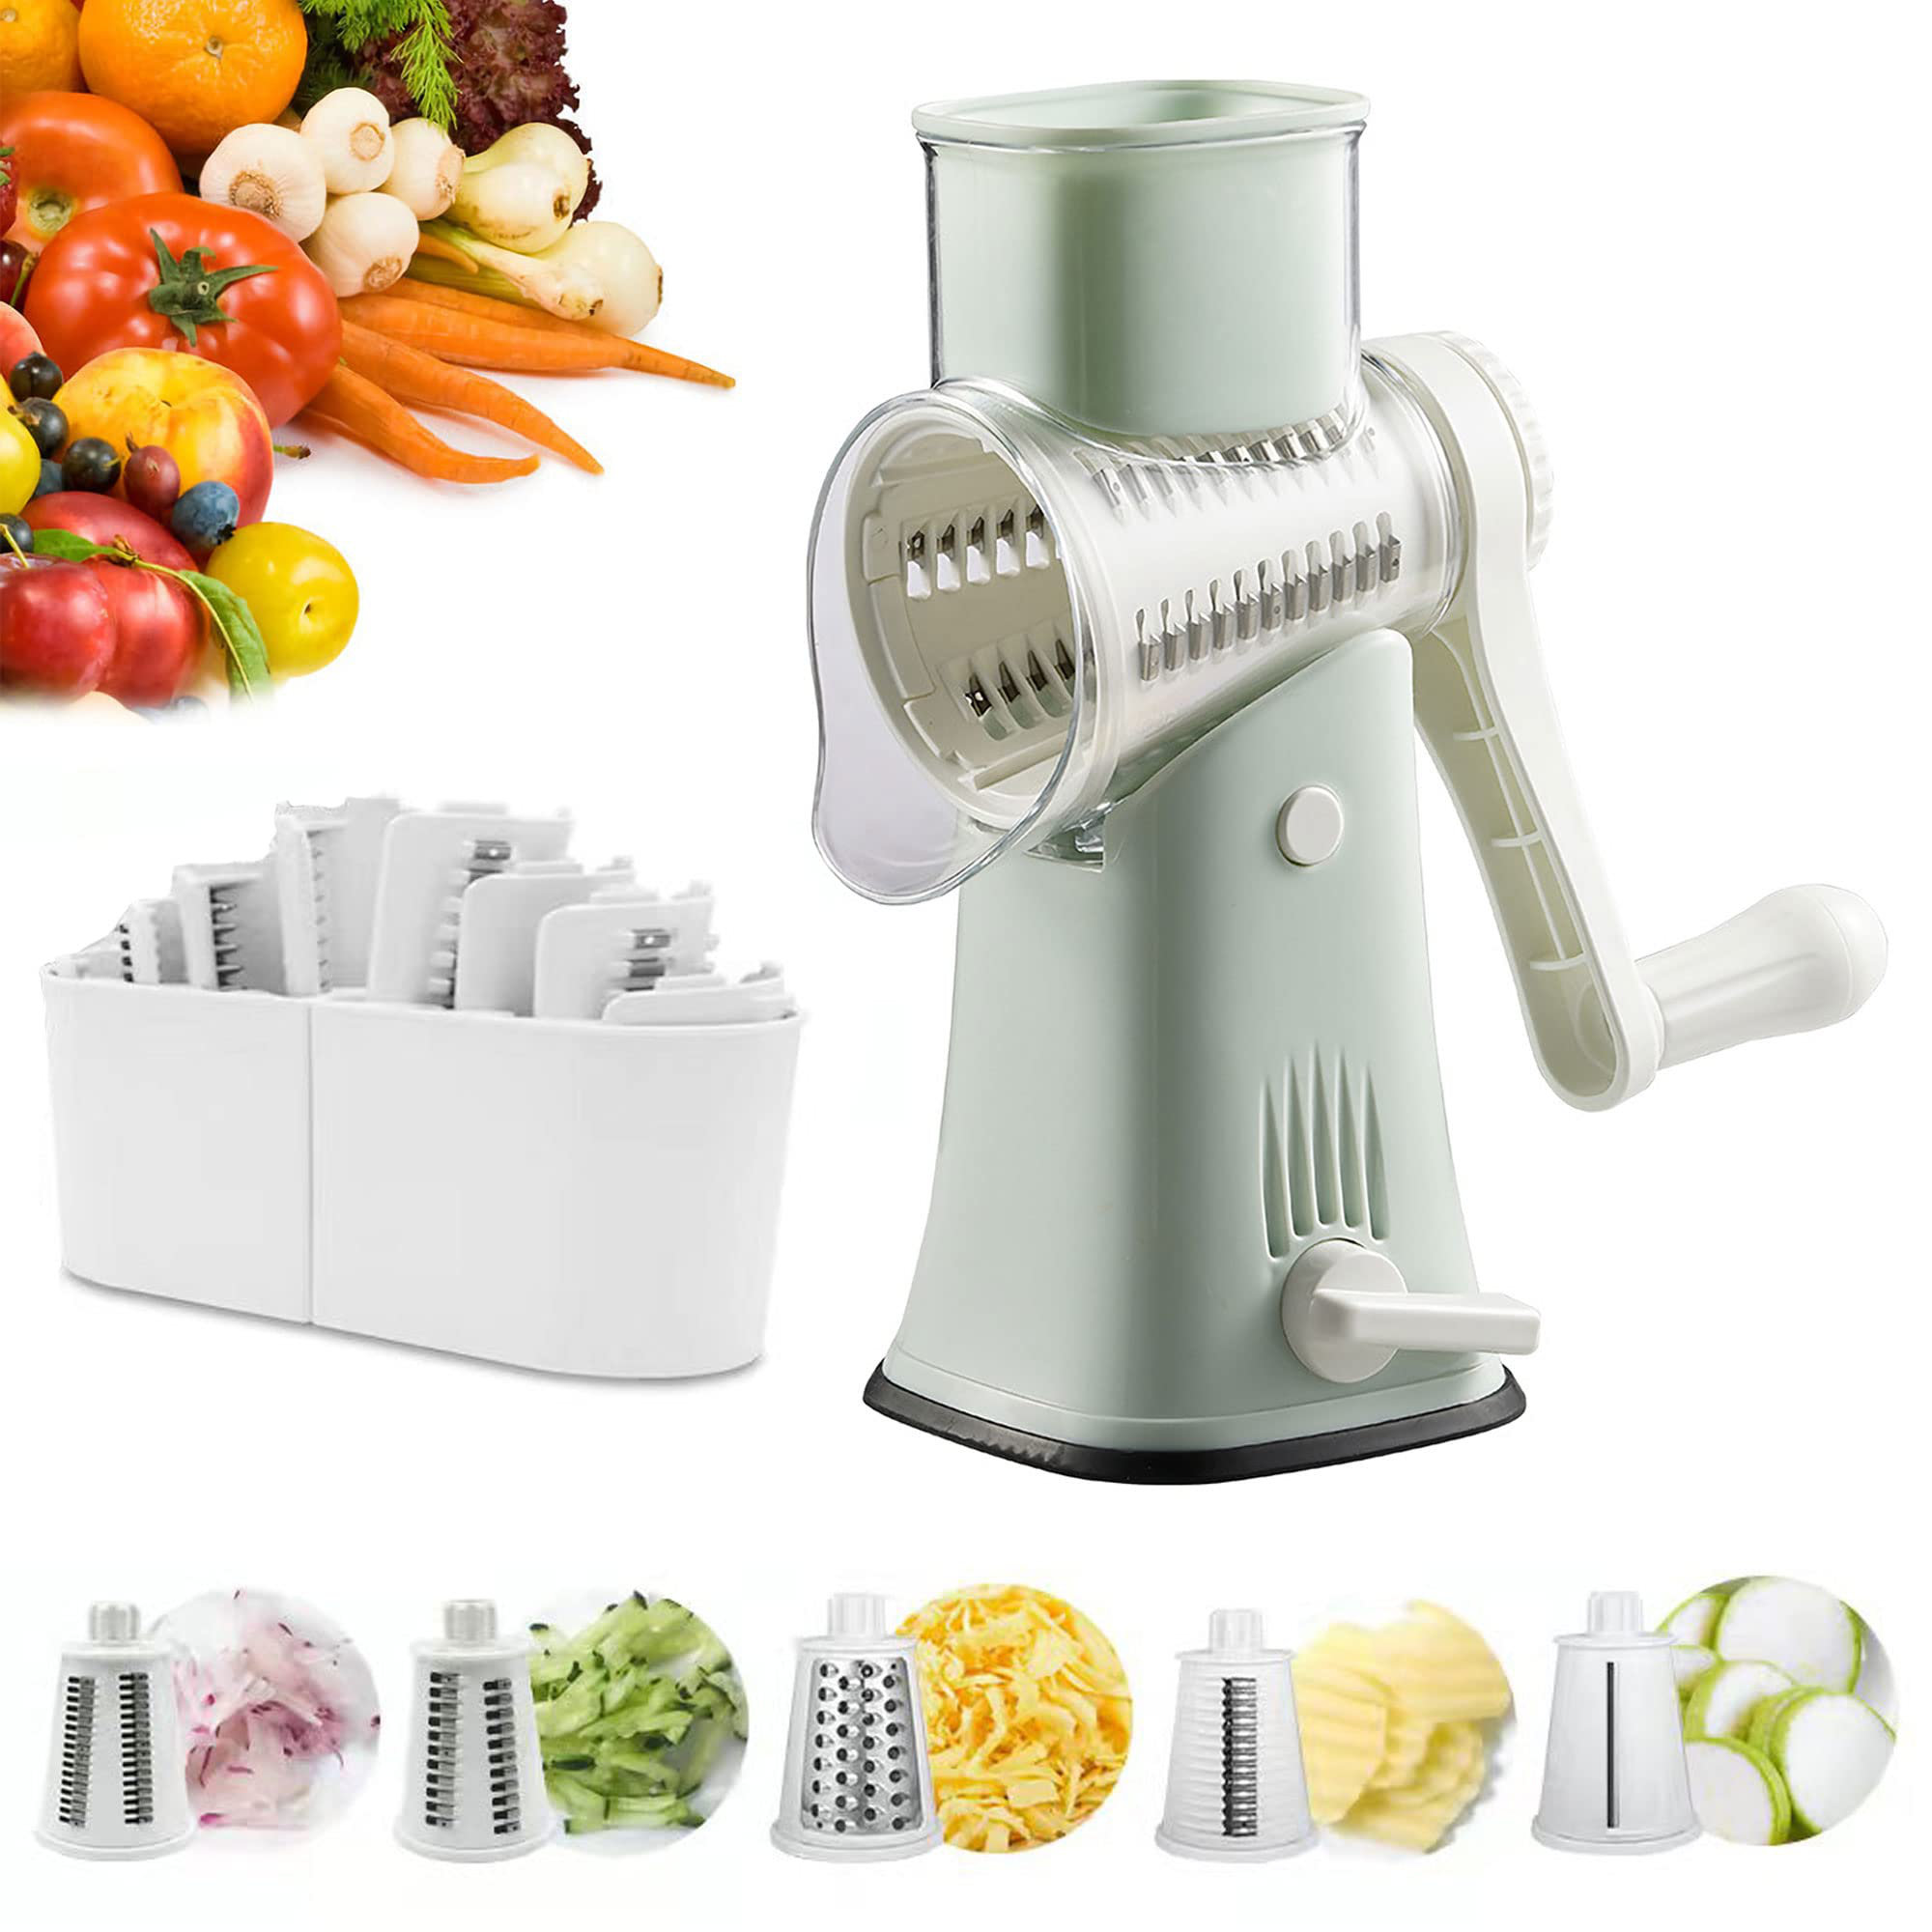 Himimi Electric Cheese Grater, Cutter, Slicer Shredder, 250W Salad